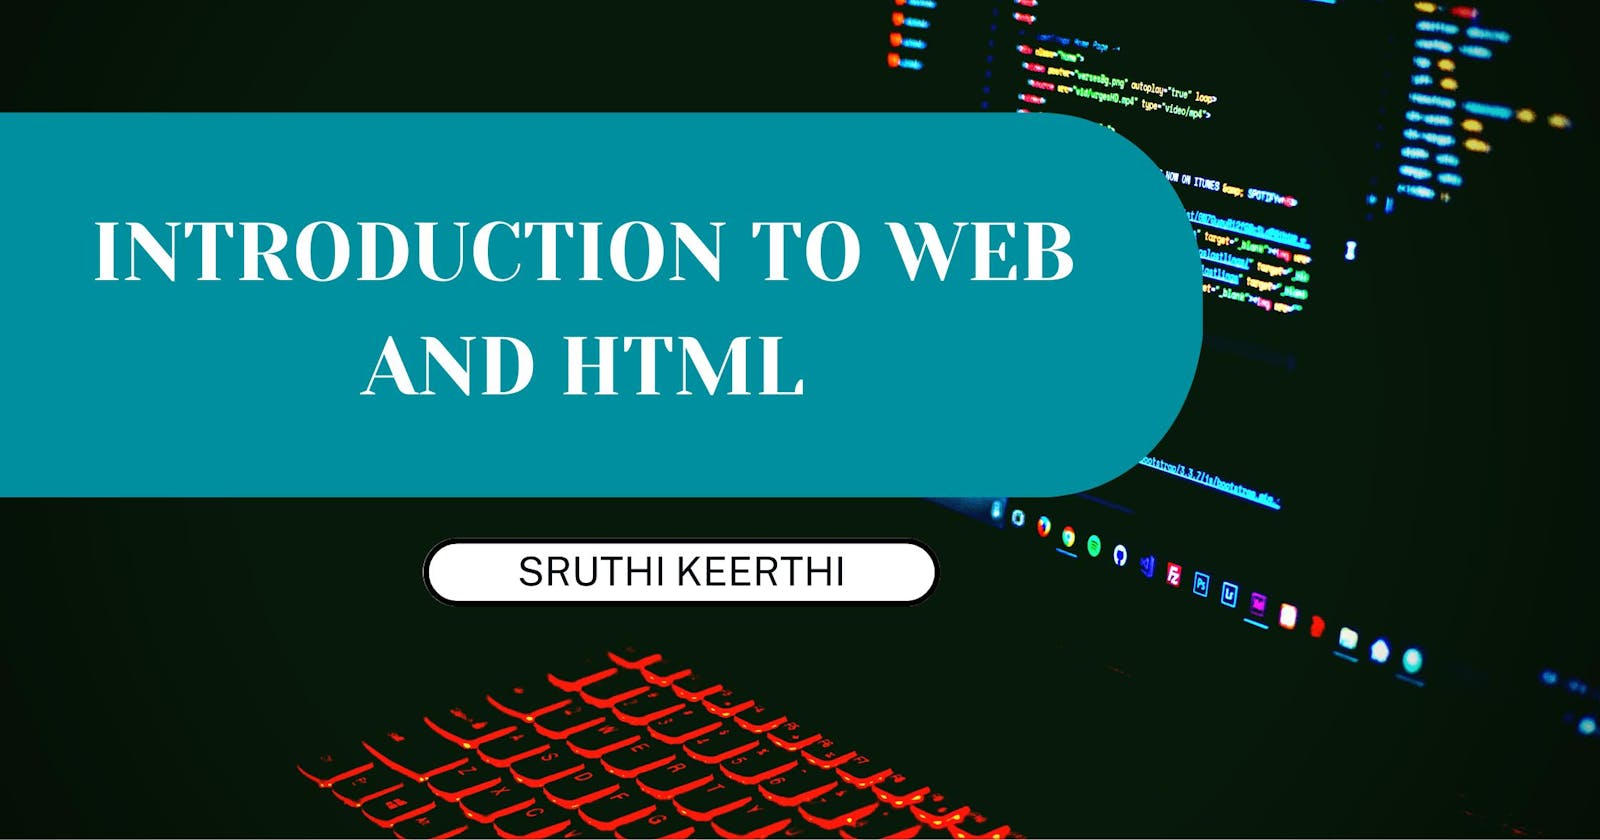 Introduction to Web and HTML